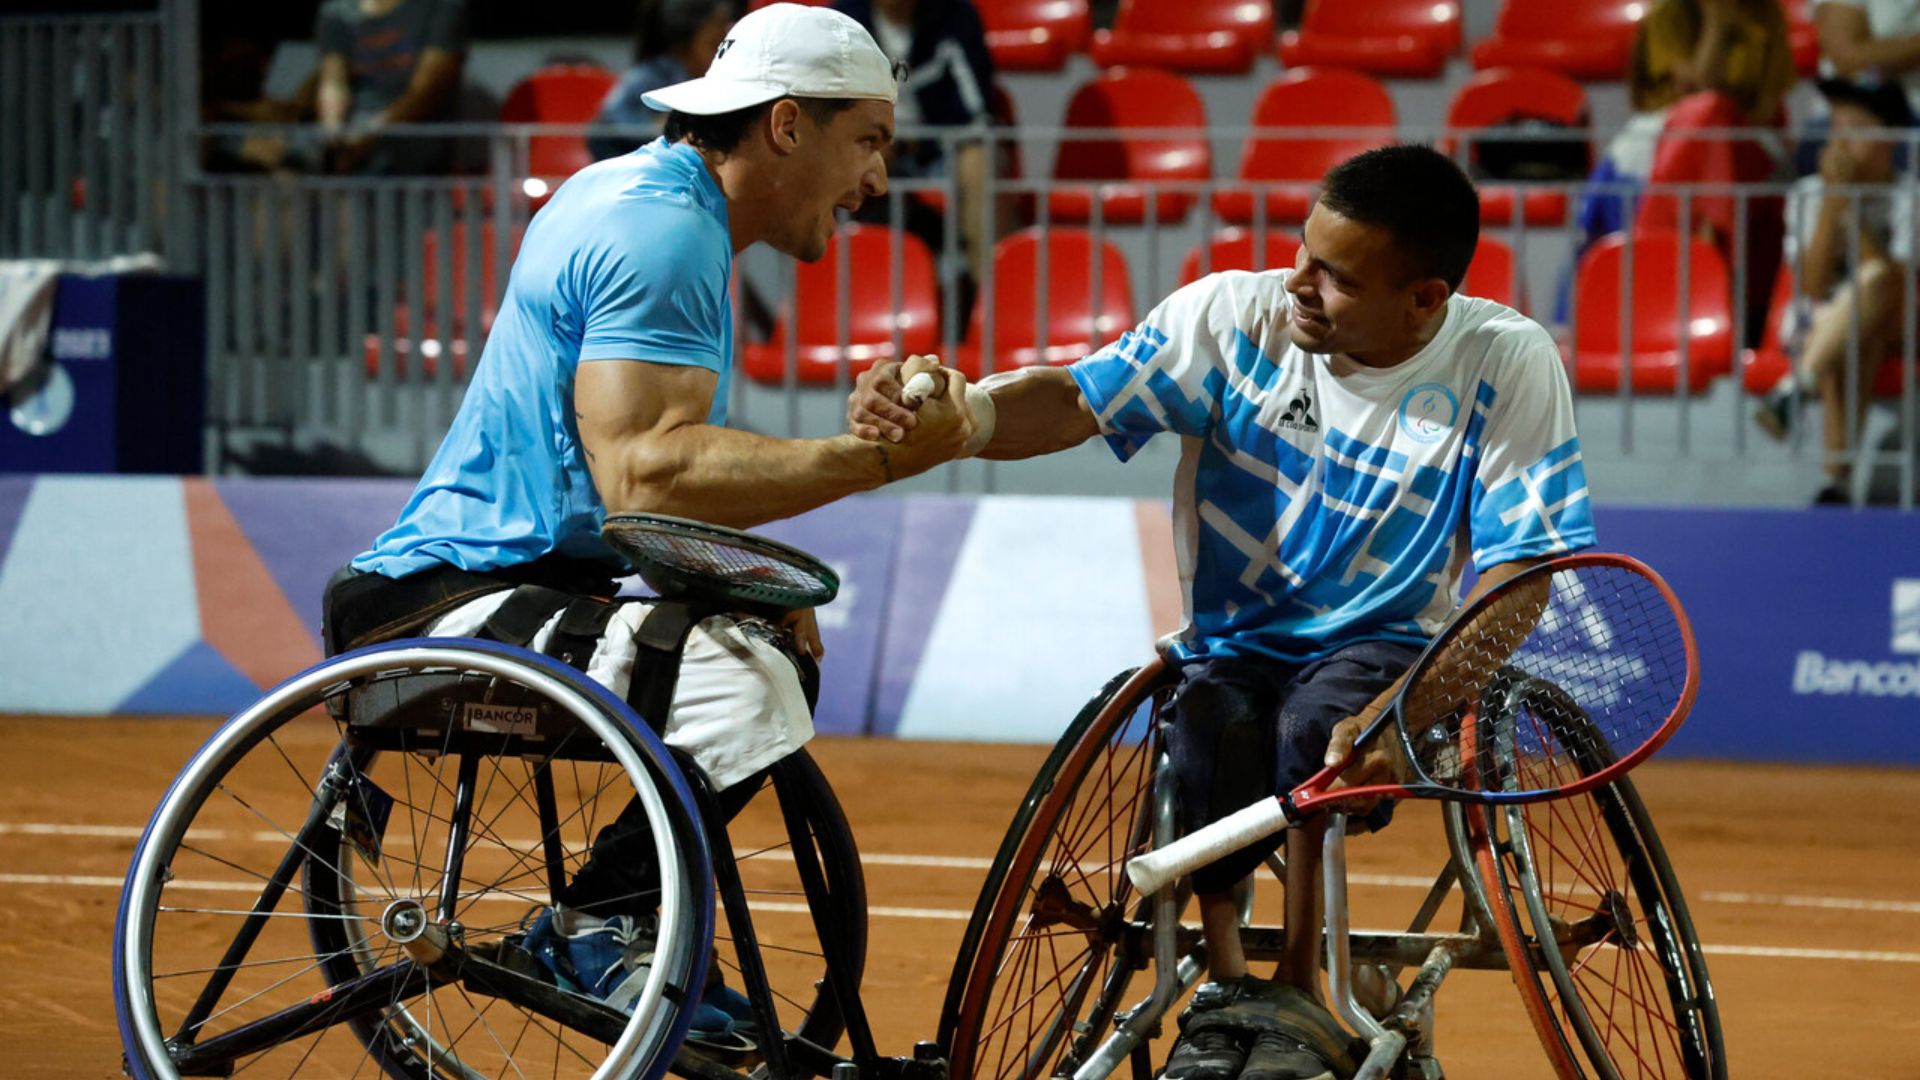 Argentina Wins Dramatic Match Against Chile in Tennis Doubles